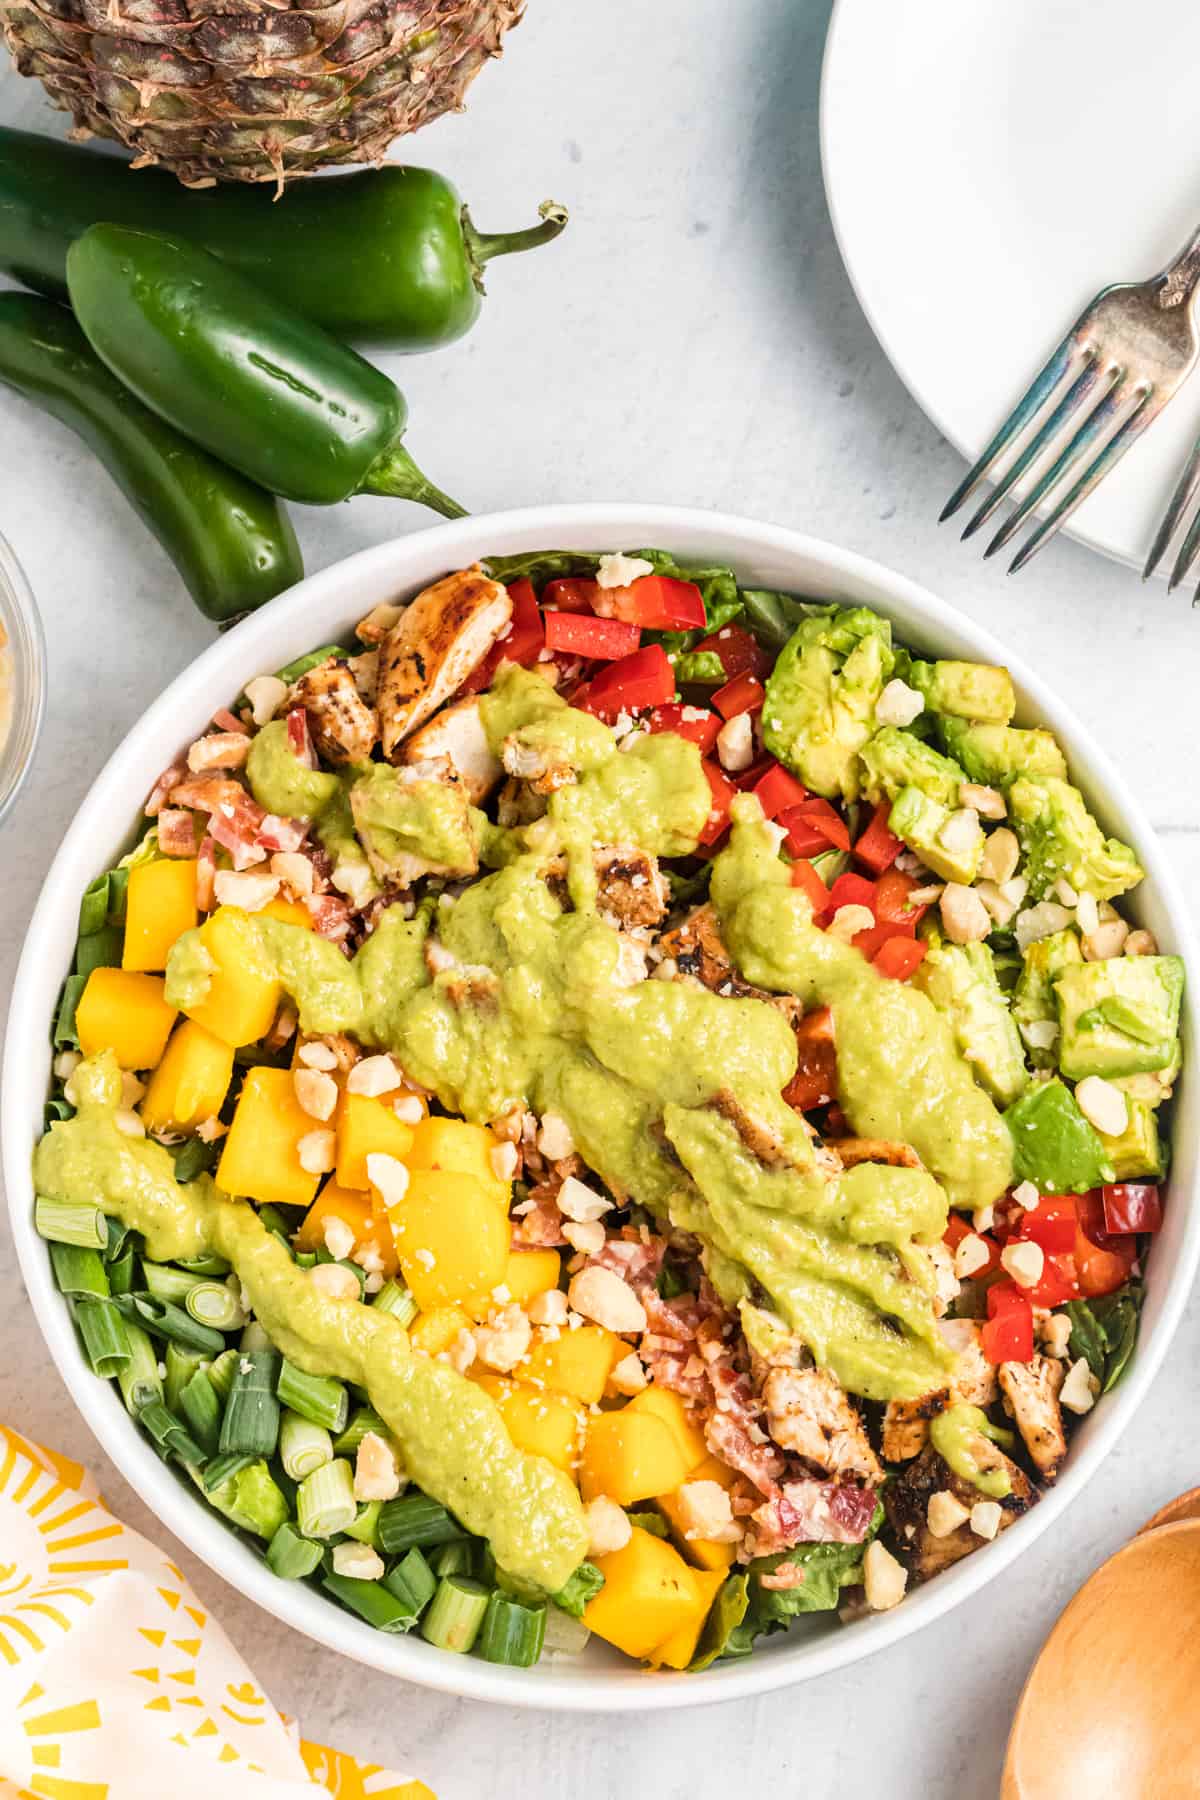 A bowl of Caribbean cobb salad is placed next to jalapenos on a white surface.